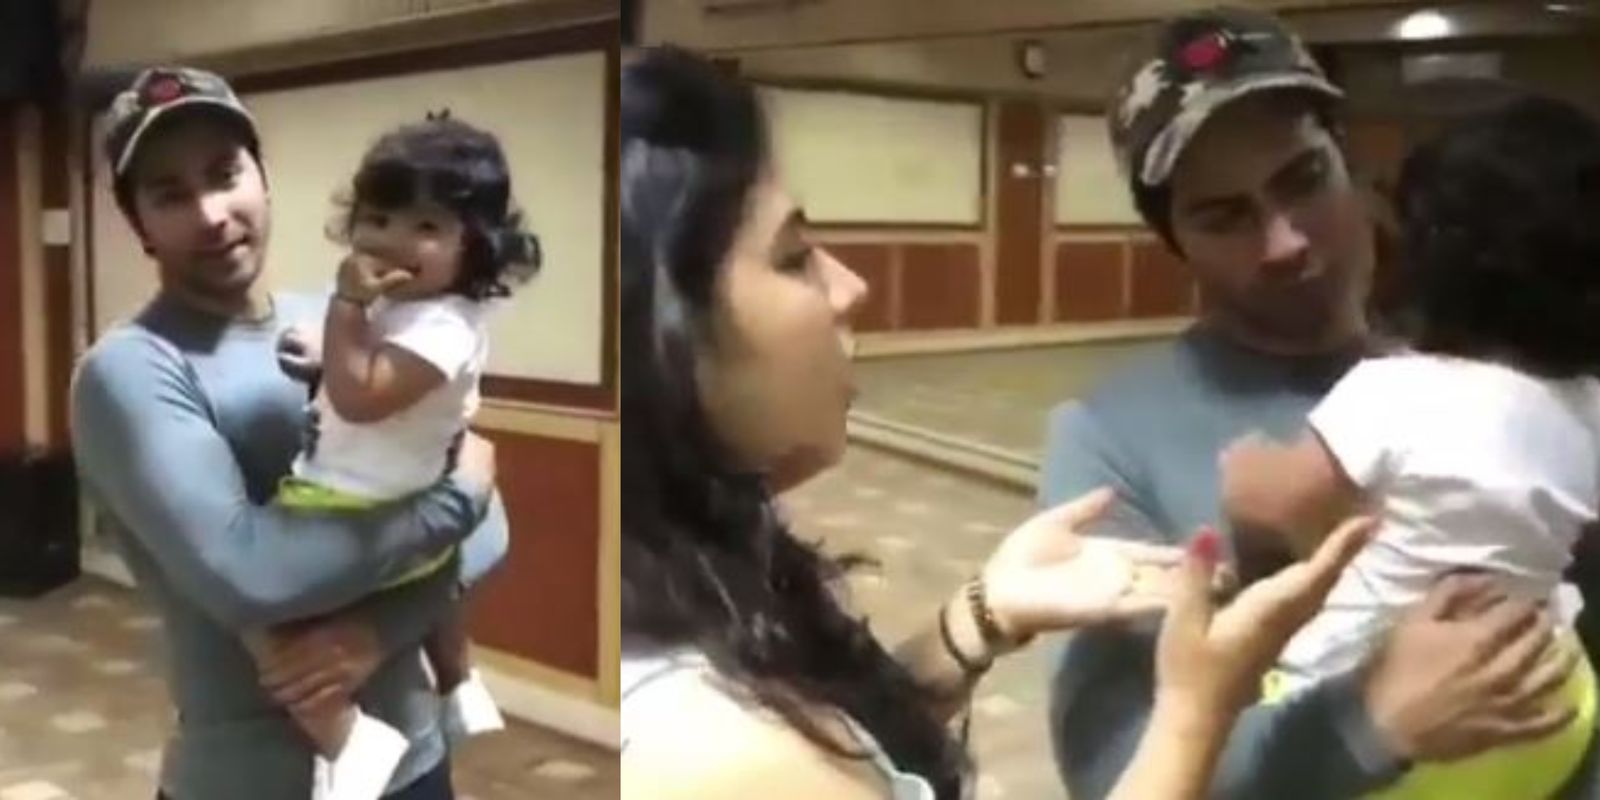 Varun Dhawan's Cutest Little Fan Refuses To Leave Him And Go To Her Mom, Actor Says 'I'm Taking Her With Me'; Watch